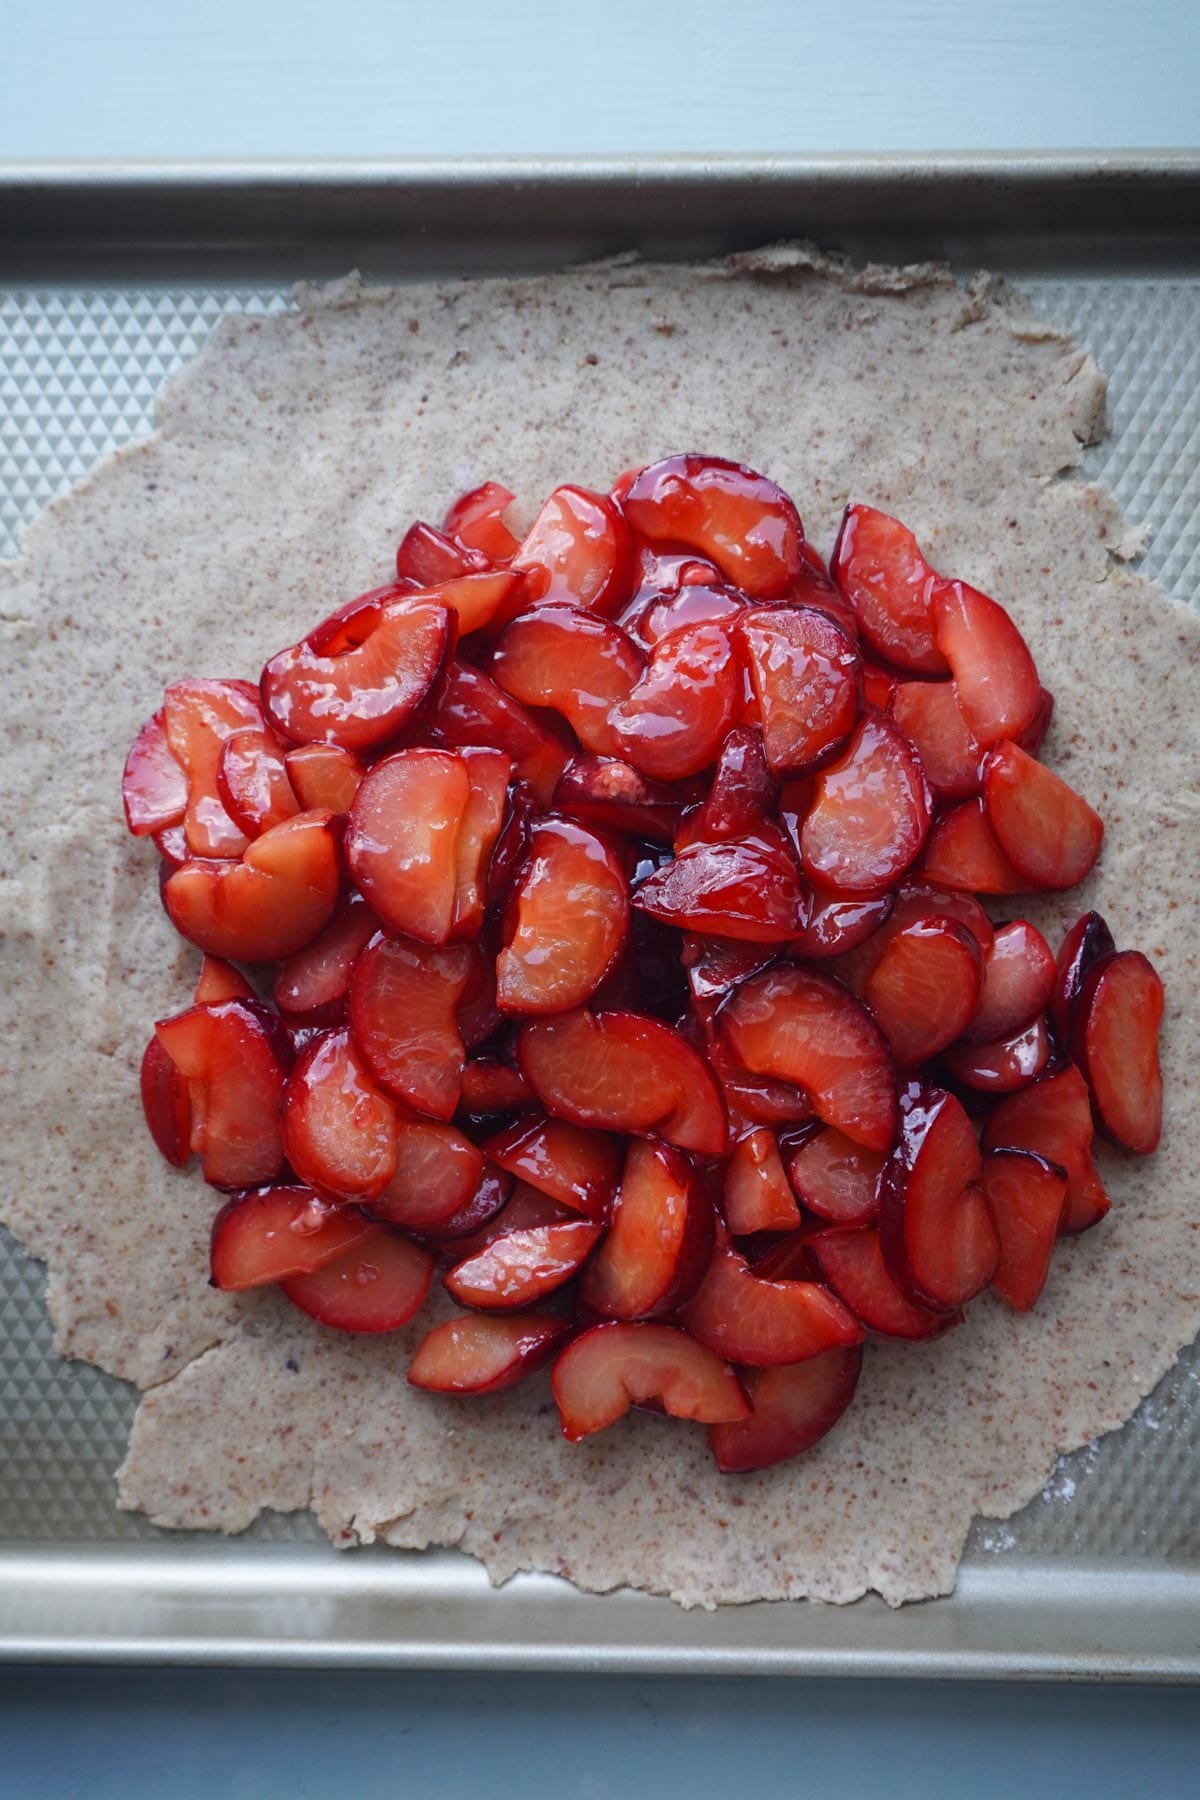 galette dough on a baking sheet with fruit